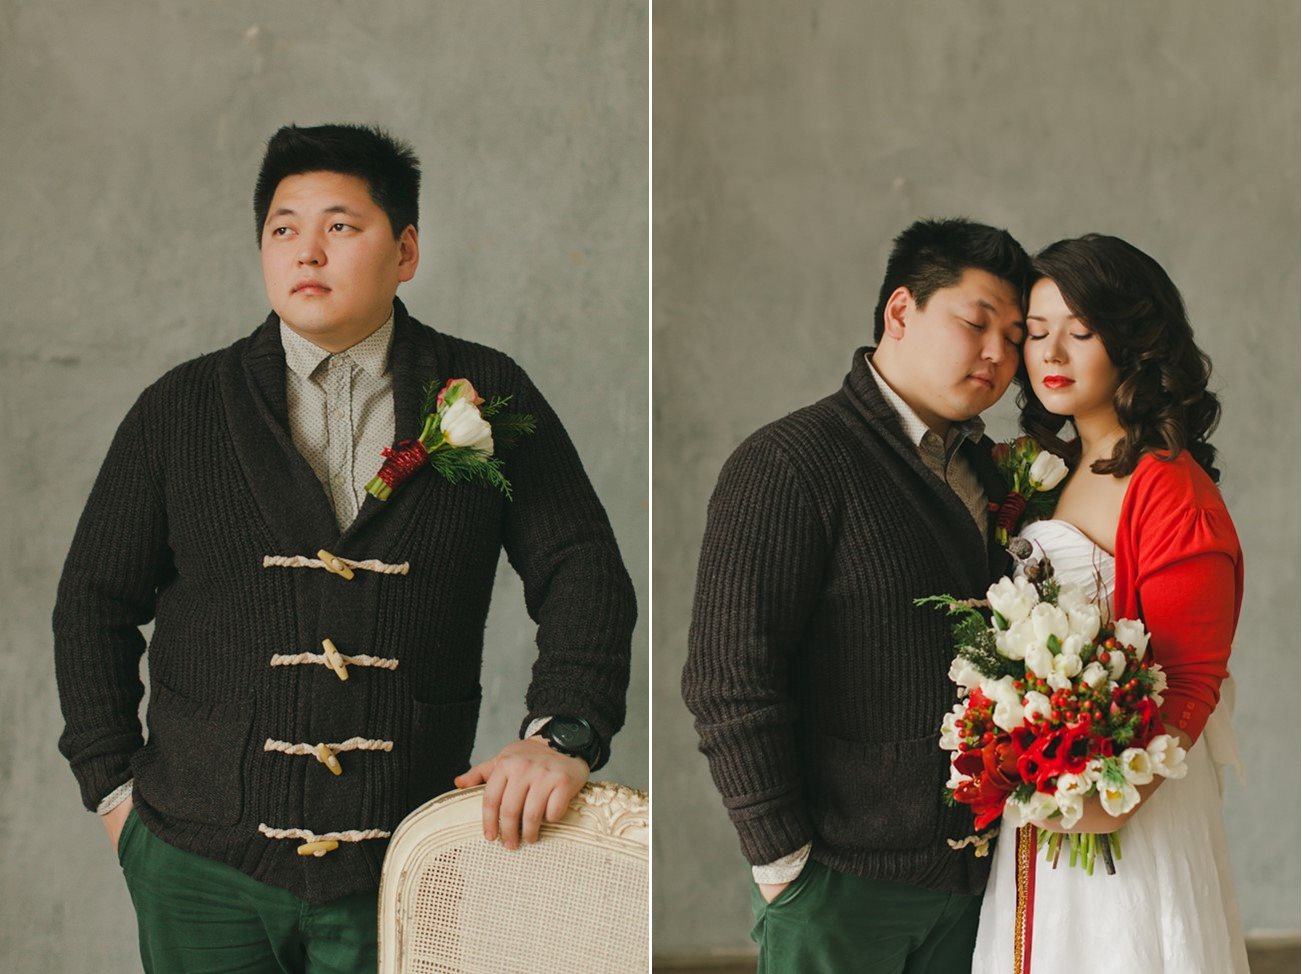 Casual Christmas Groom - A Cosy Winter Wedding Inspiration Shoot in Red, Green & White from WarmPhoto